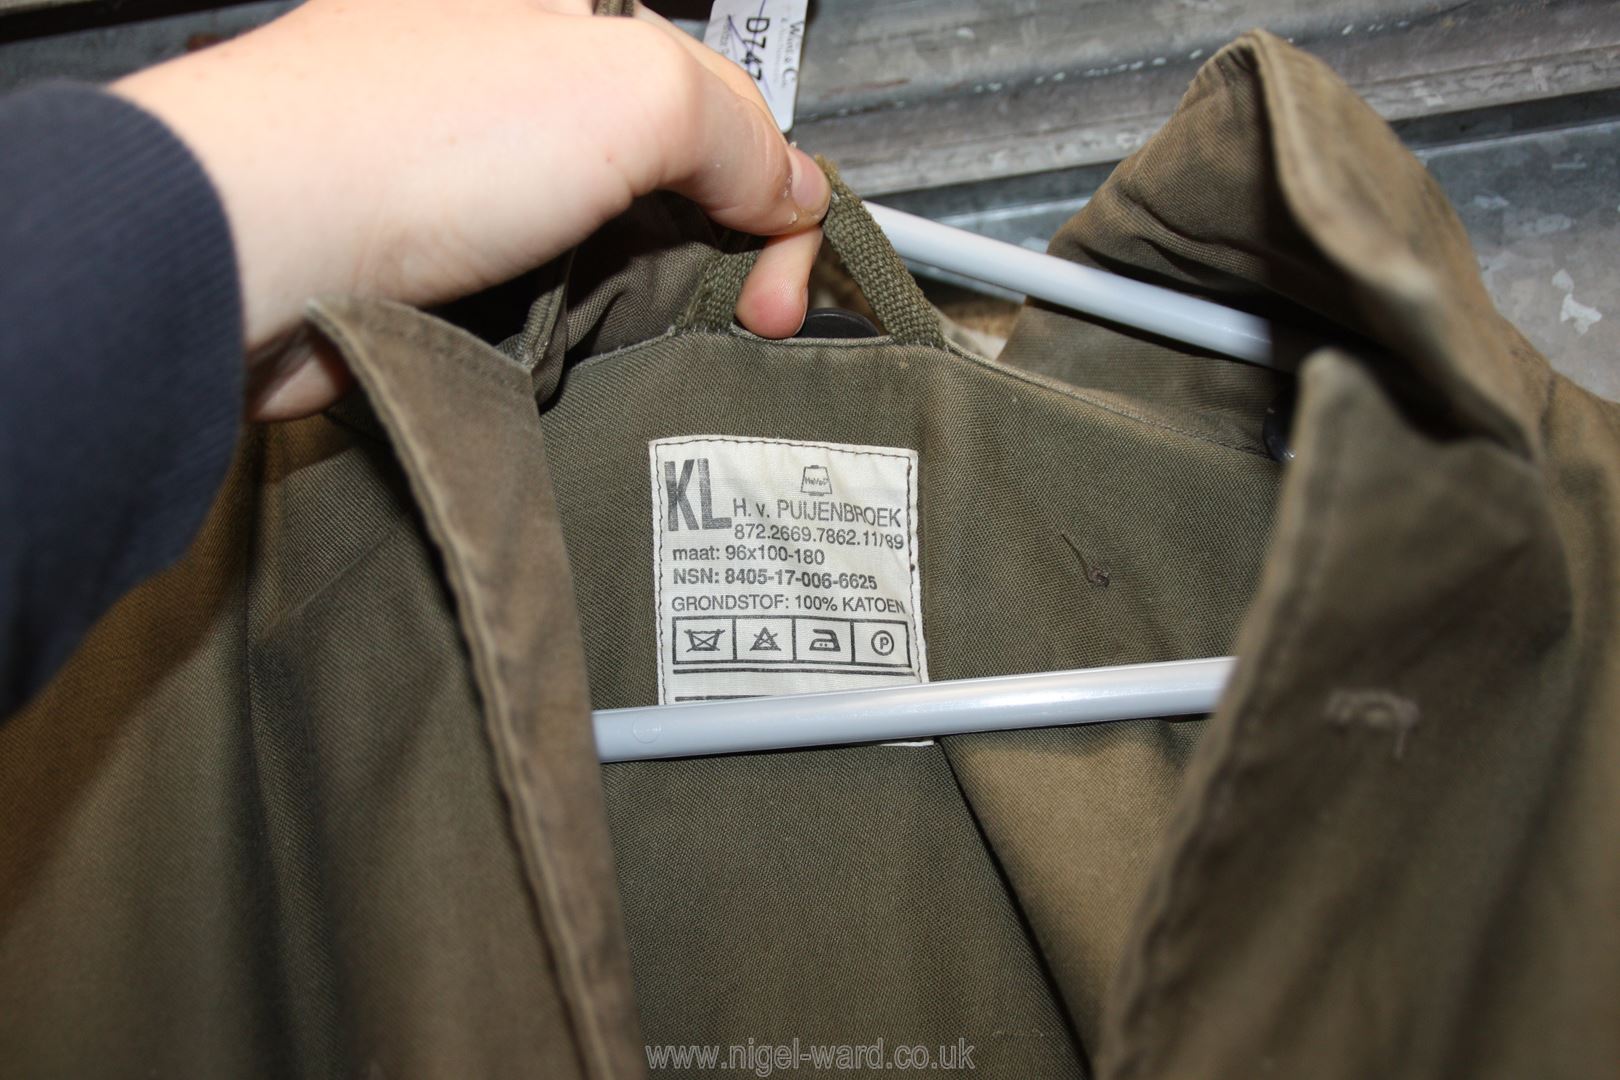 A KL Hv. Puijenbroek olive green military style Jacket, (used condition). - Image 2 of 2